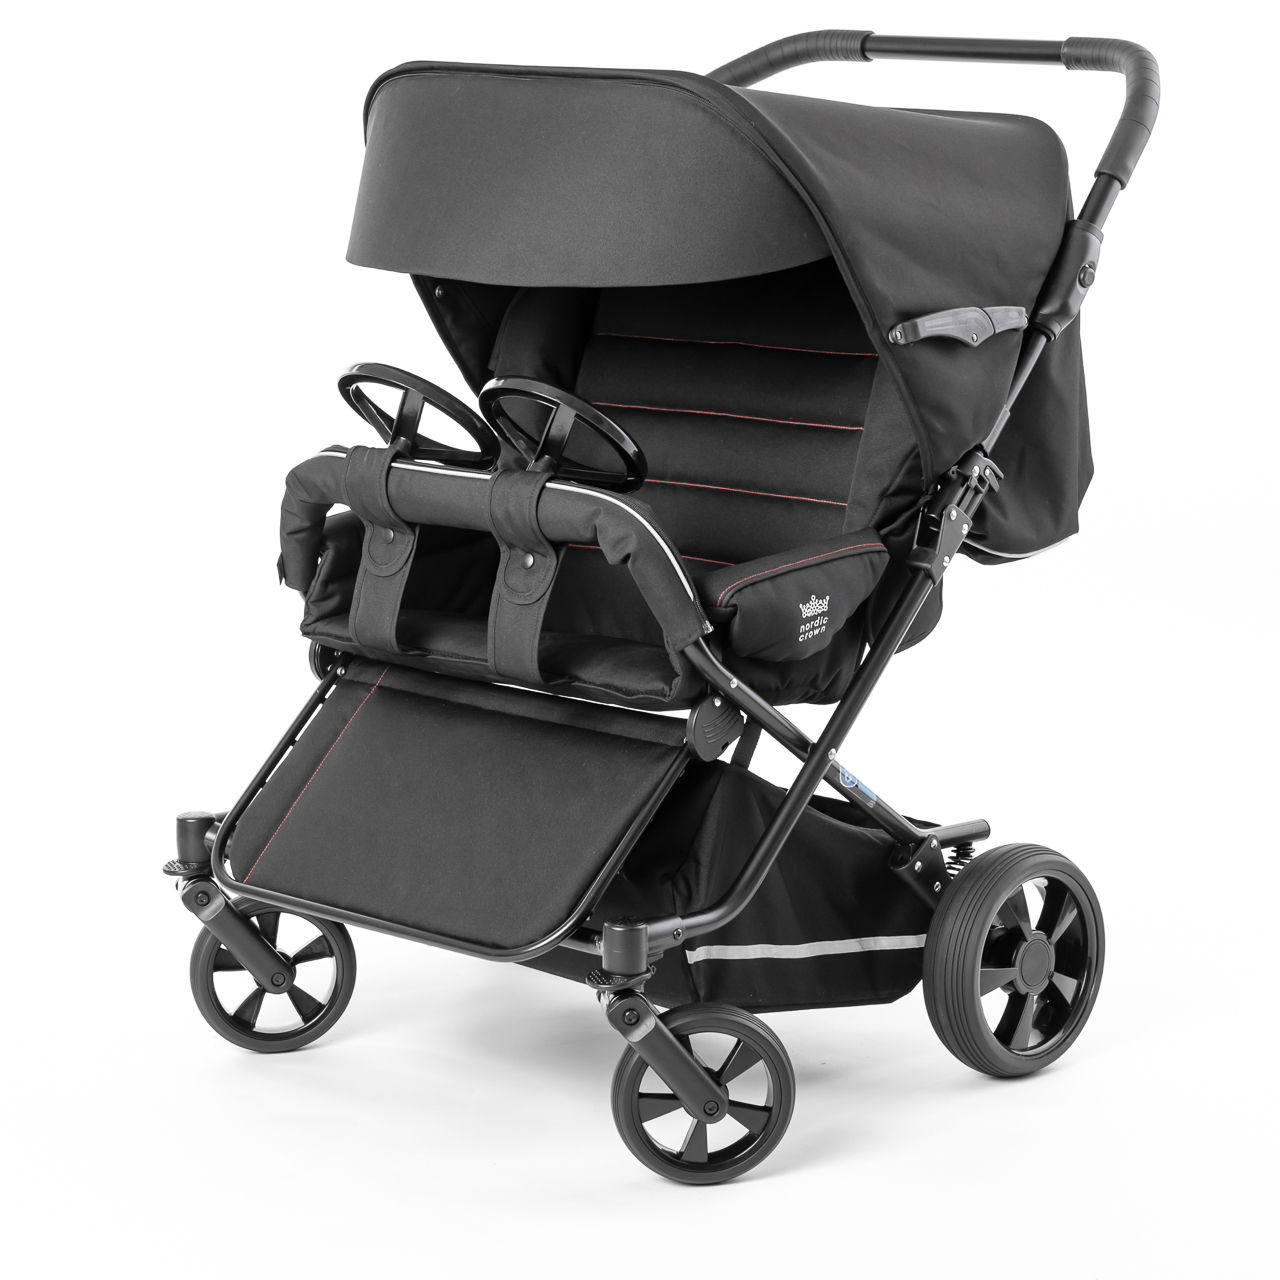 Twinspin_377_Red_Raven_stroller (1)